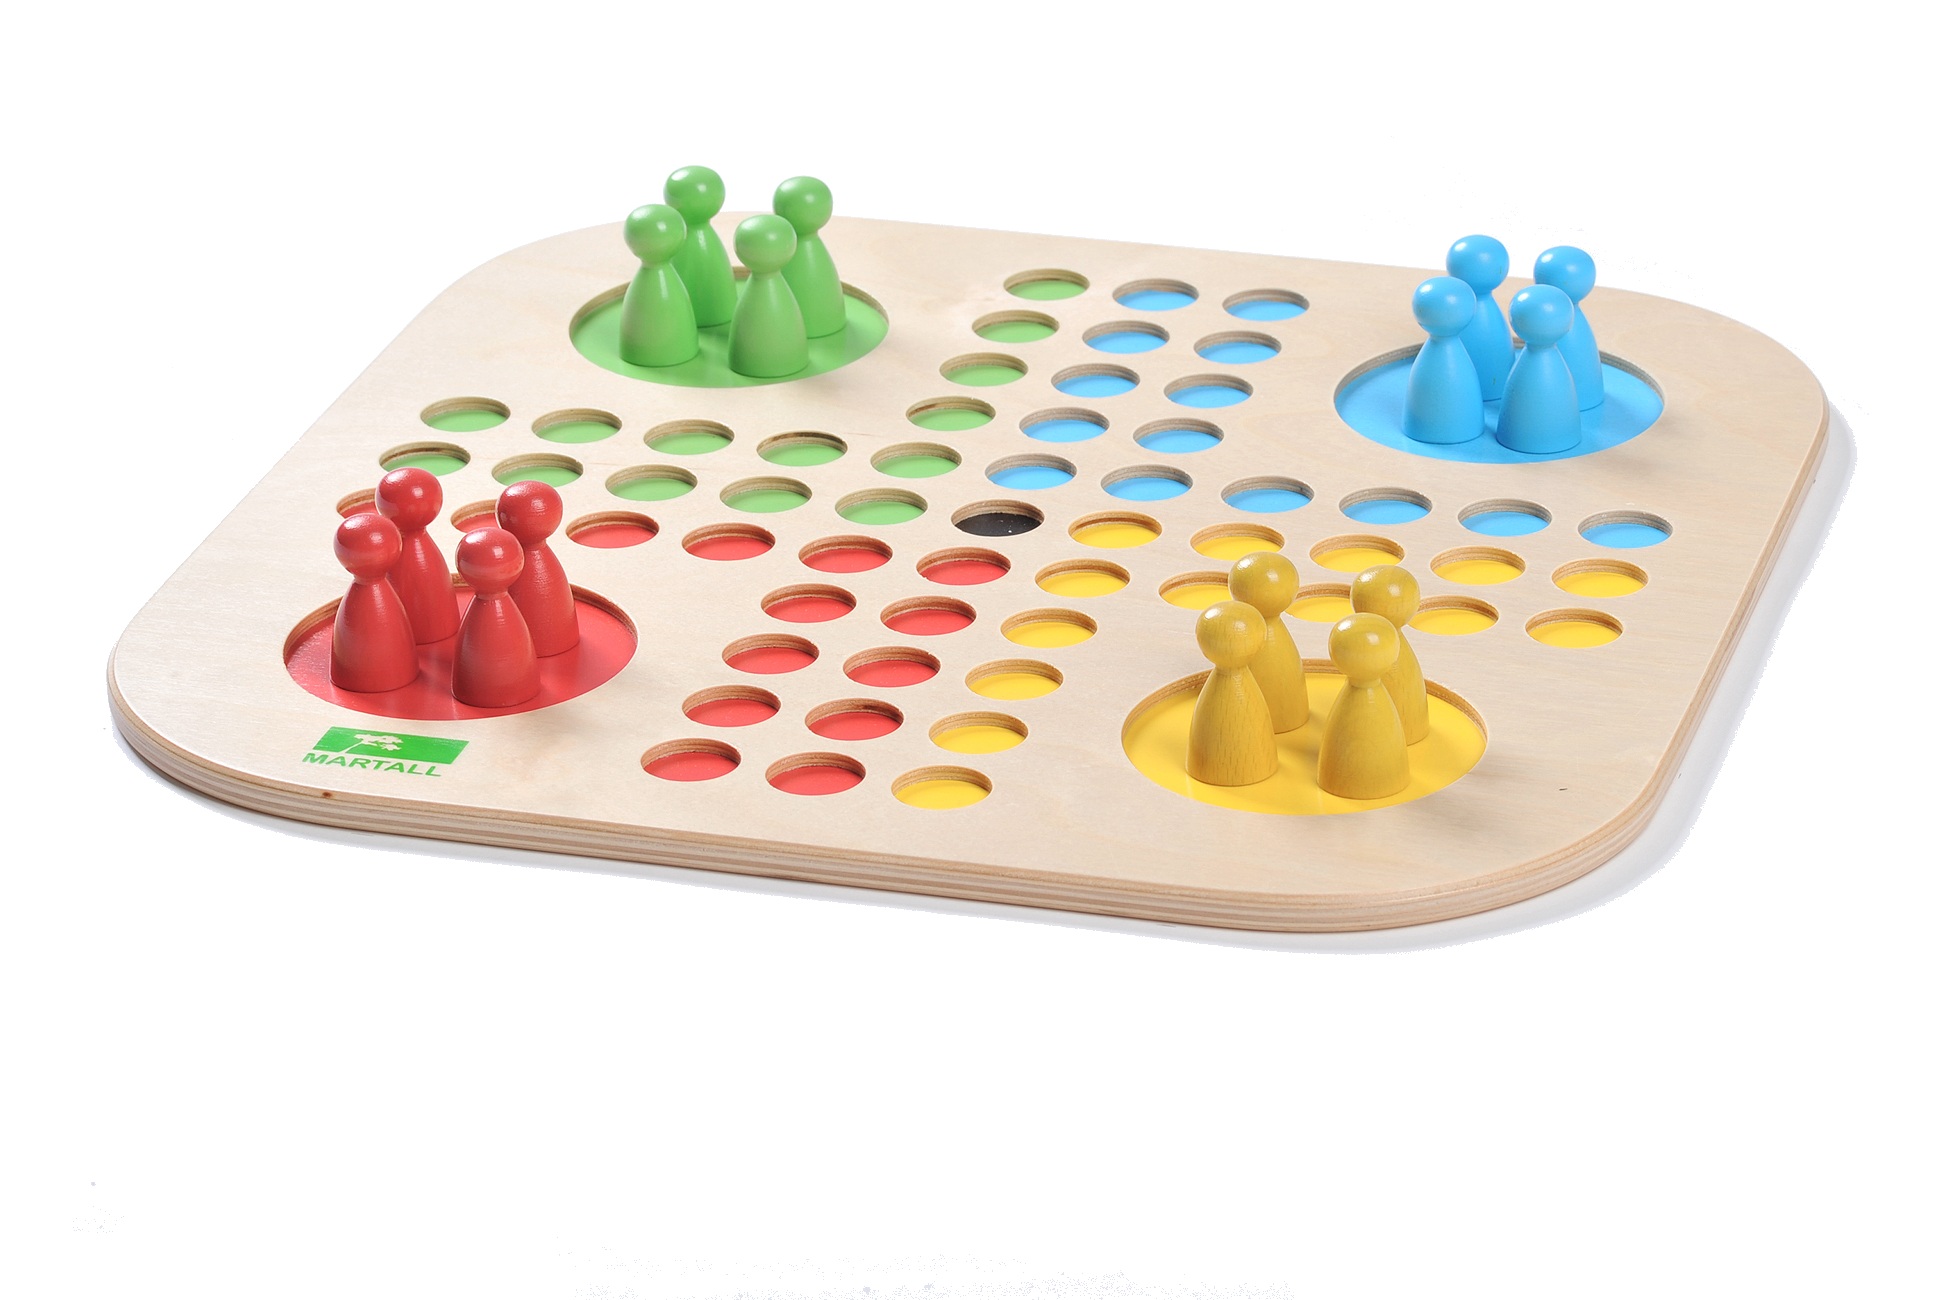 Martall Large Wooden Board Game